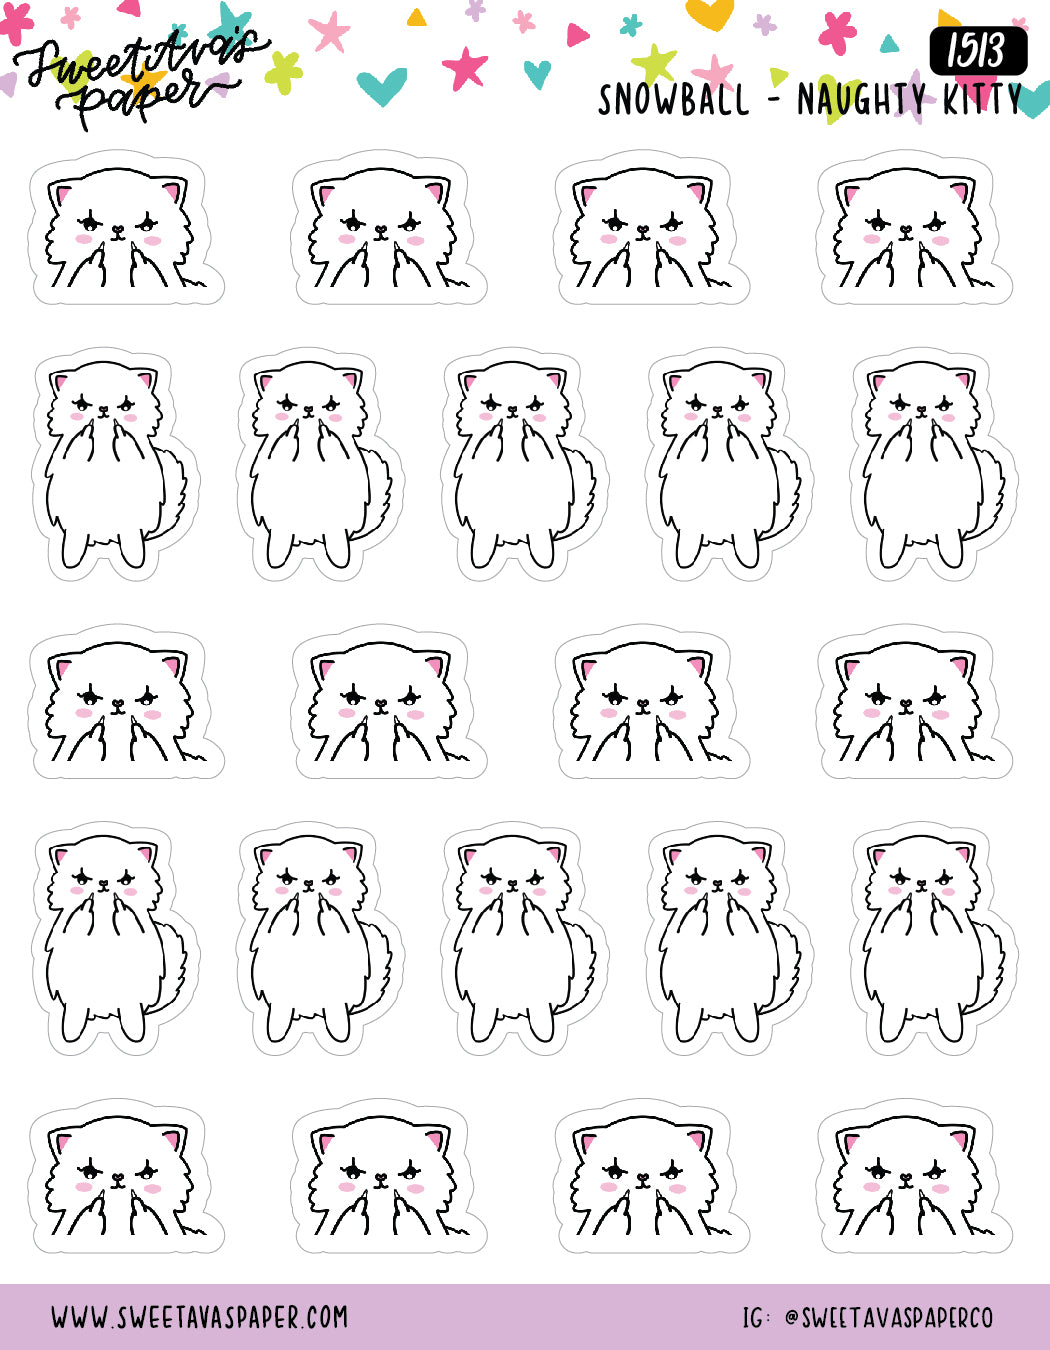 Middle Finger Planner Stickers - Snowball The Cat [1513]